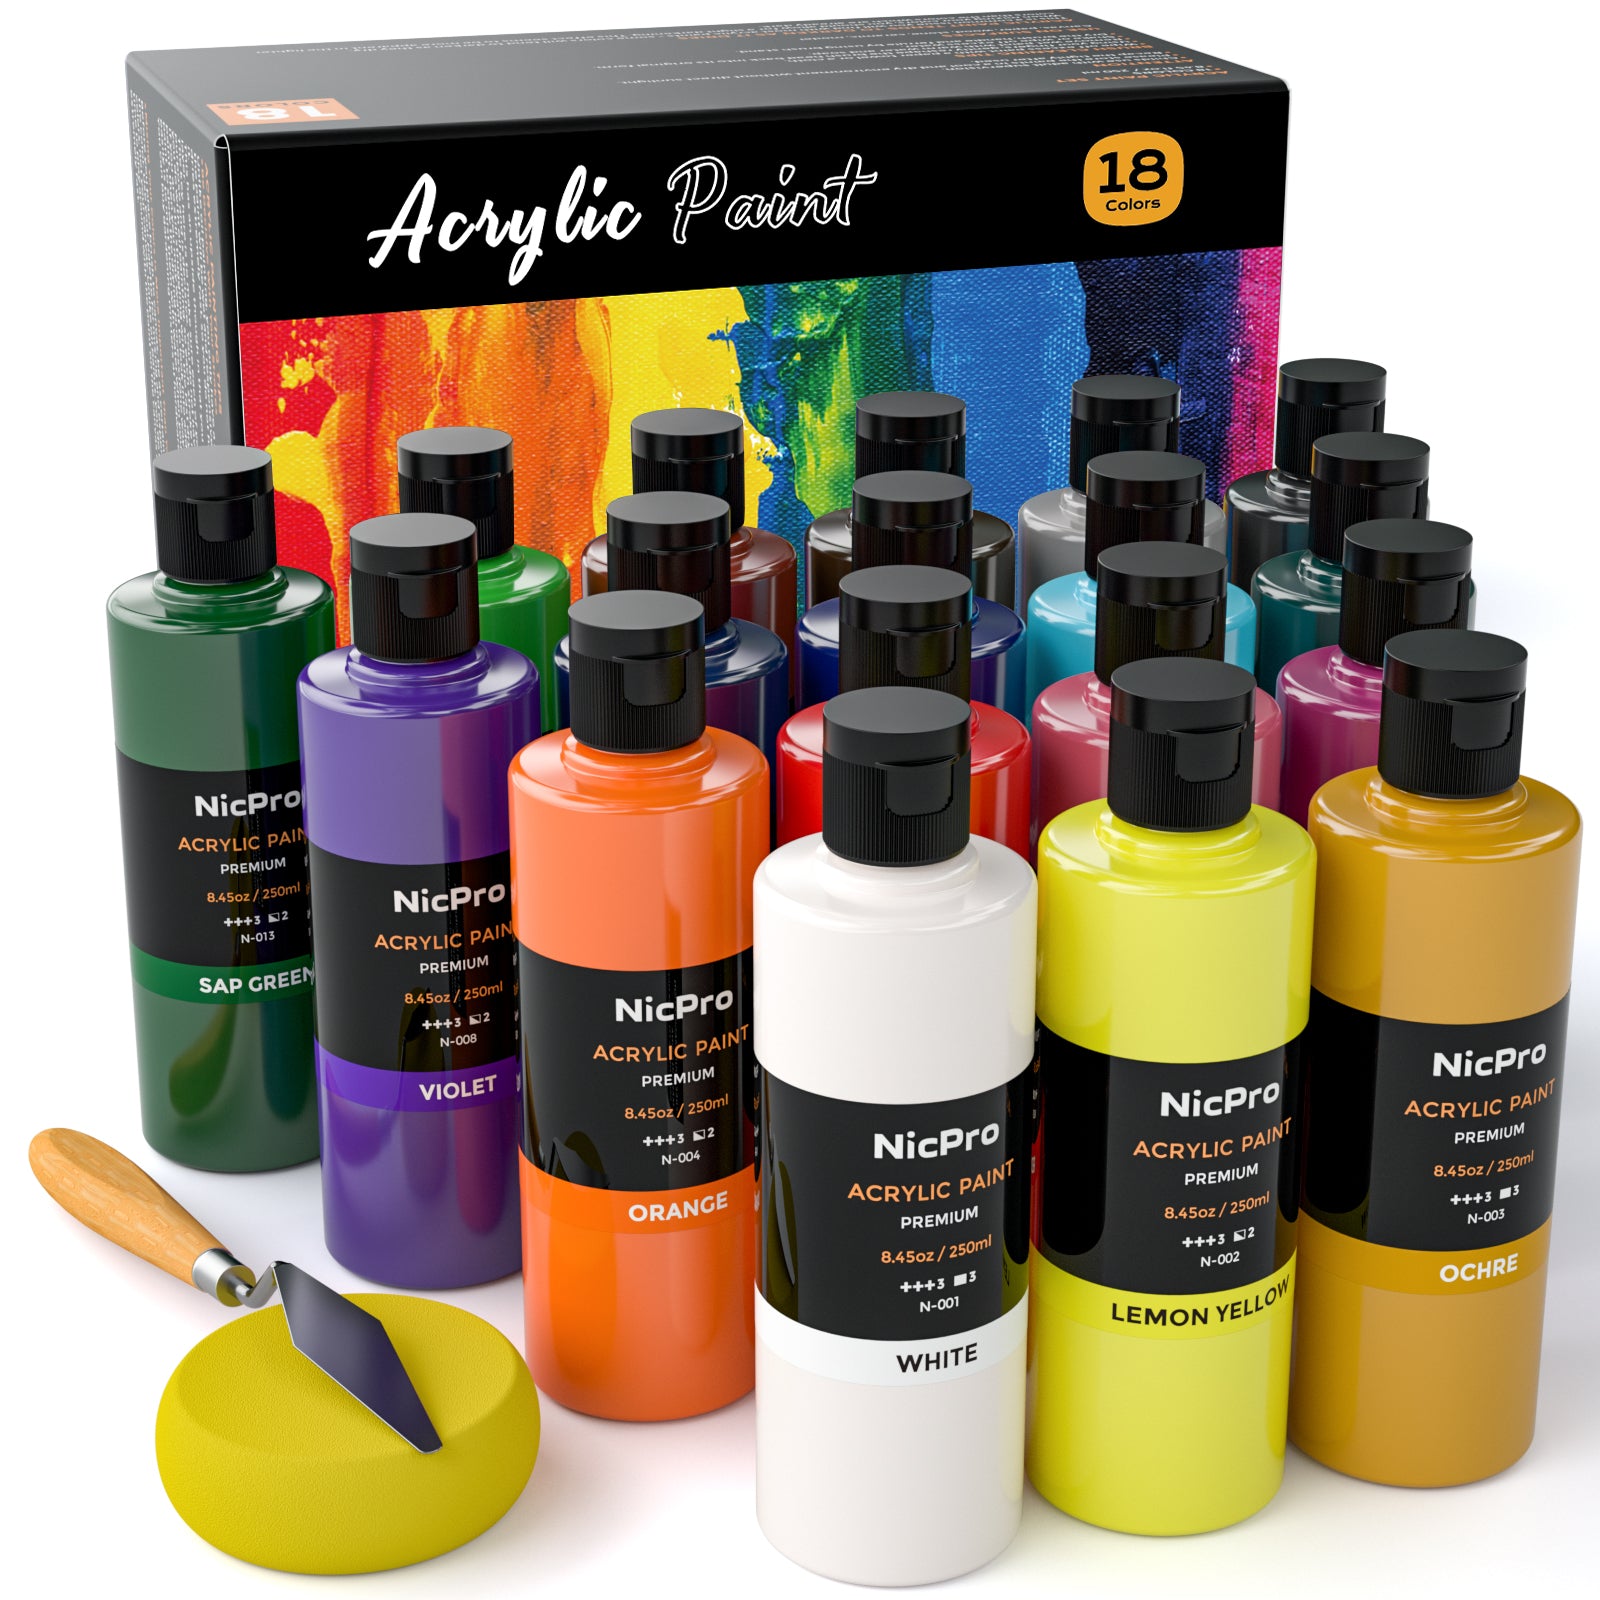 Nicpro 18 Colors Large Acrylic Paint Set, 8.45 fl oz./ 250 ml Artist Painting Supplies Bulk Non-Toxic For Multi Surface Canvas, Wood, Fabric, Leather, Cardboard, Paper, Crafts, Hobby with Color Wheel